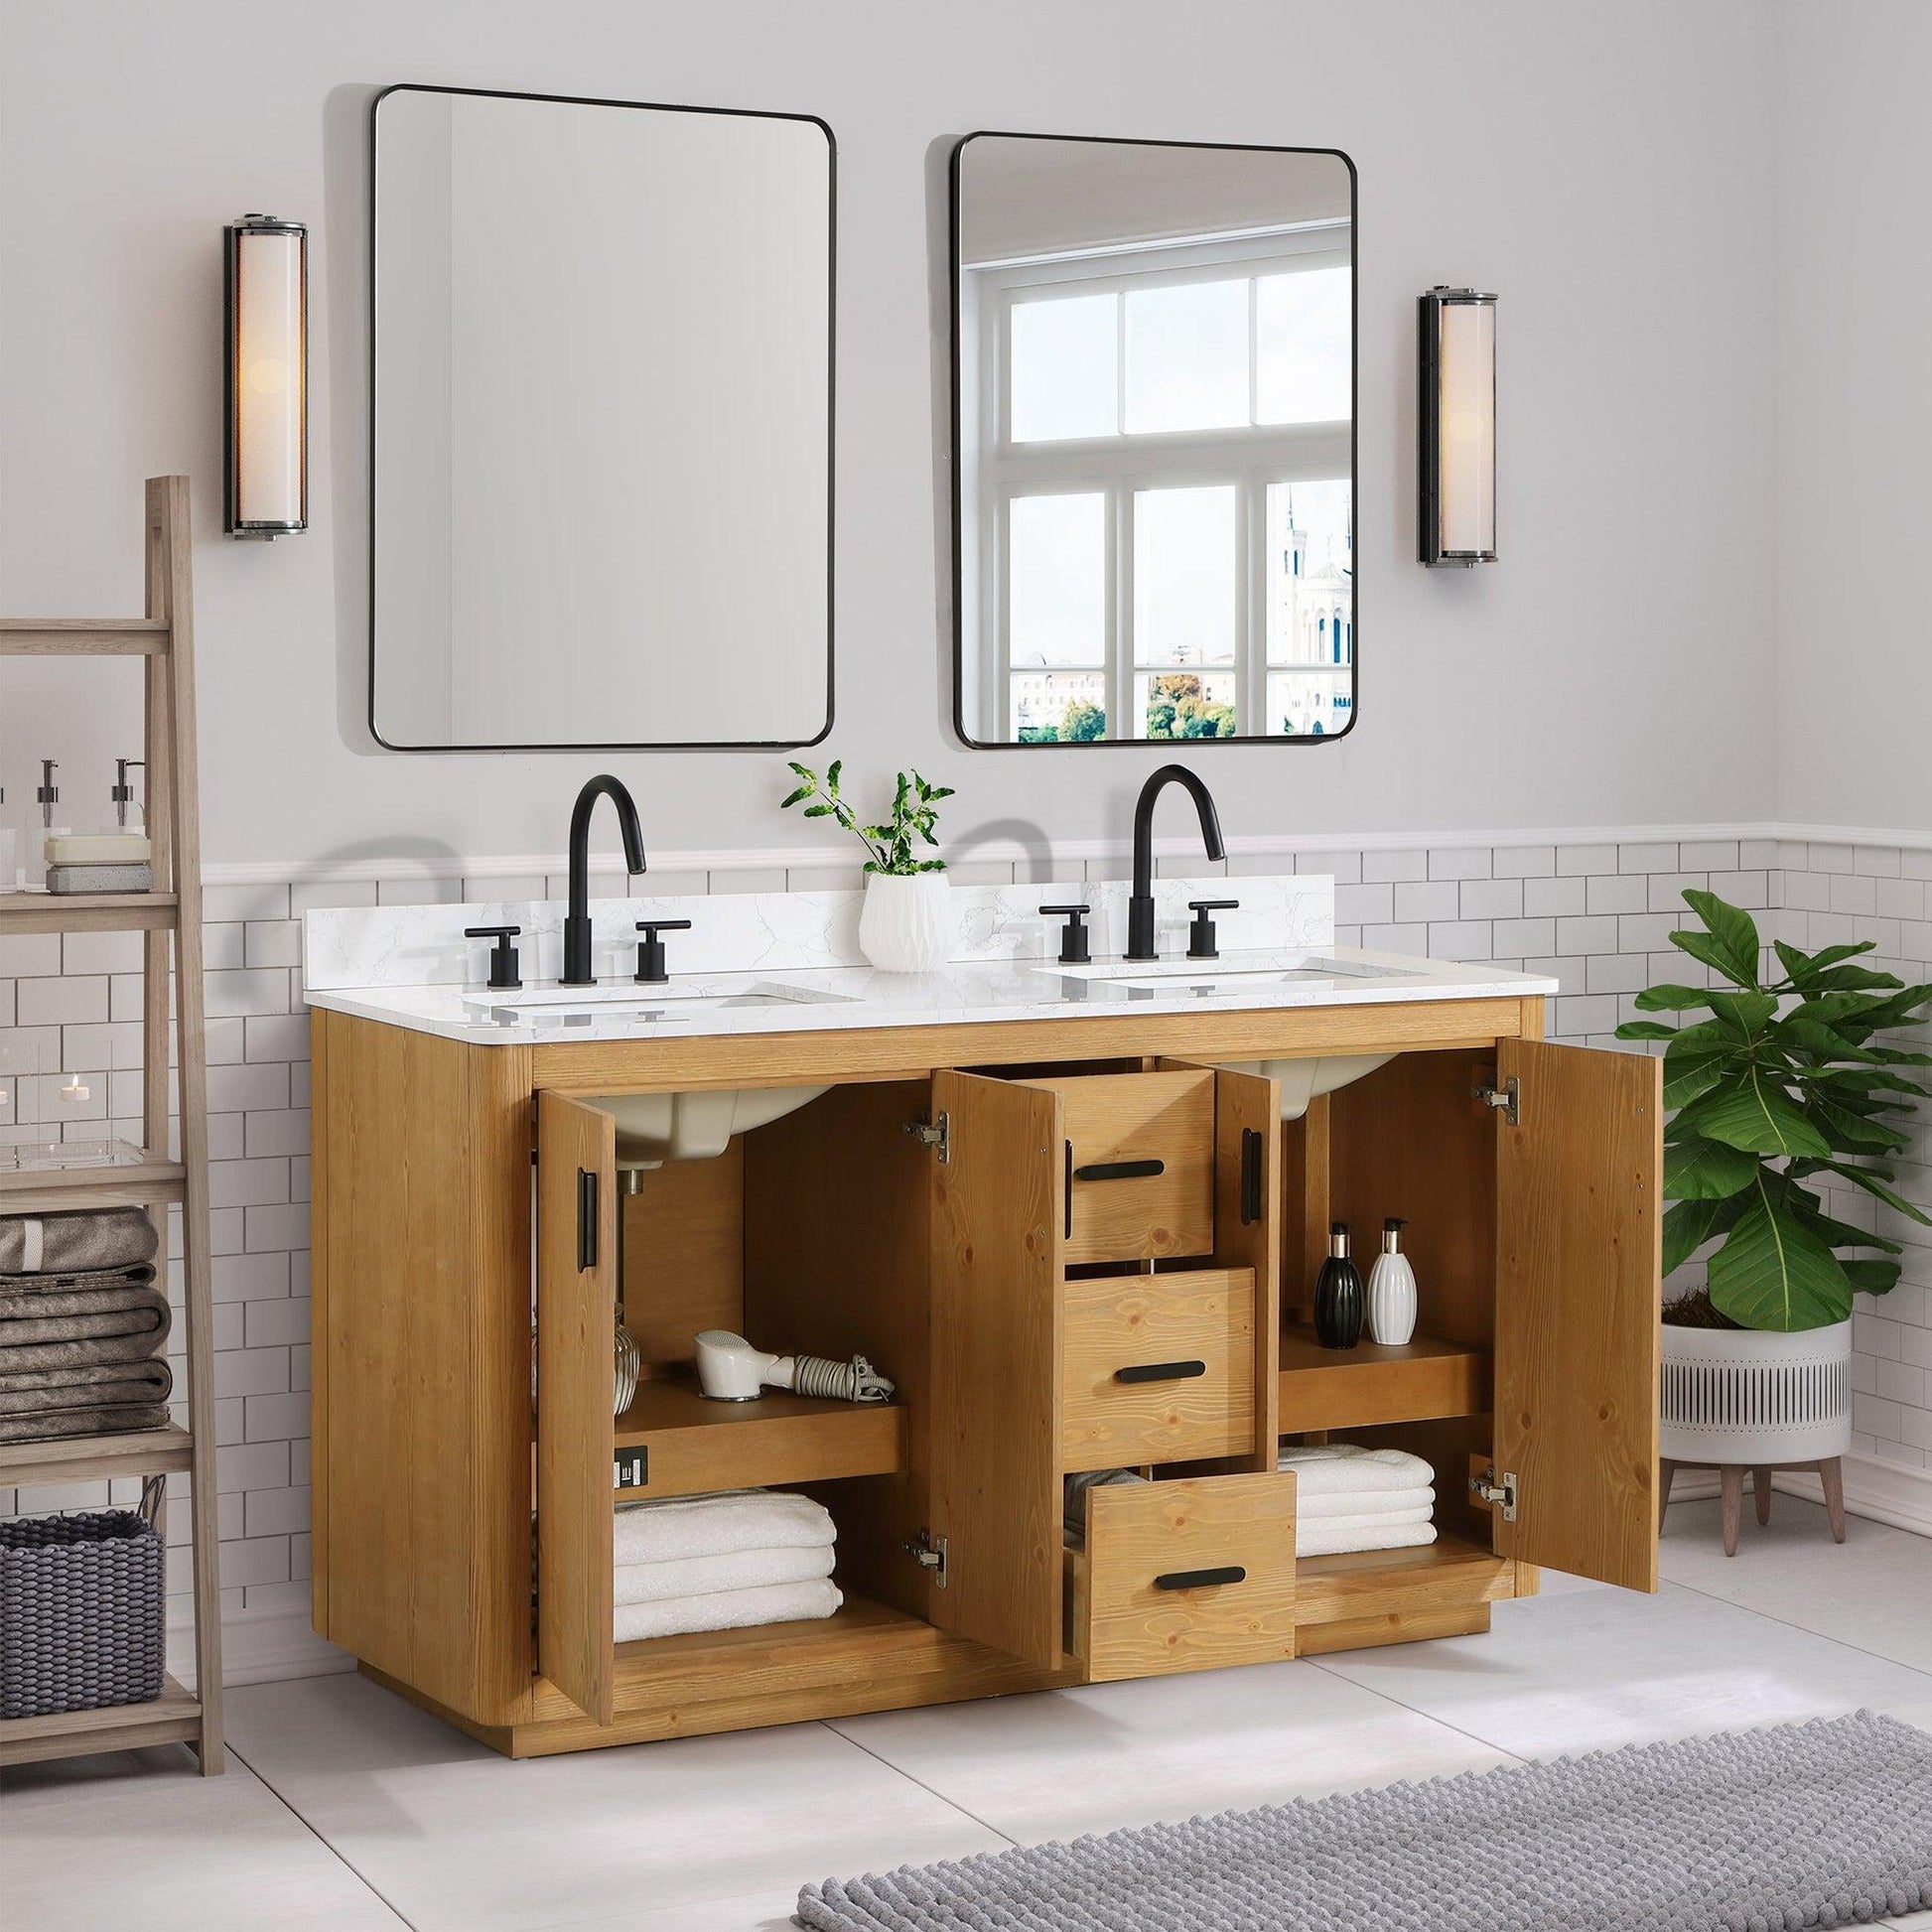 Altair Design Perla 60 Double Bathroom Vanity in Natural Wood with Grain White Composite Stone Countertop, with Mirror